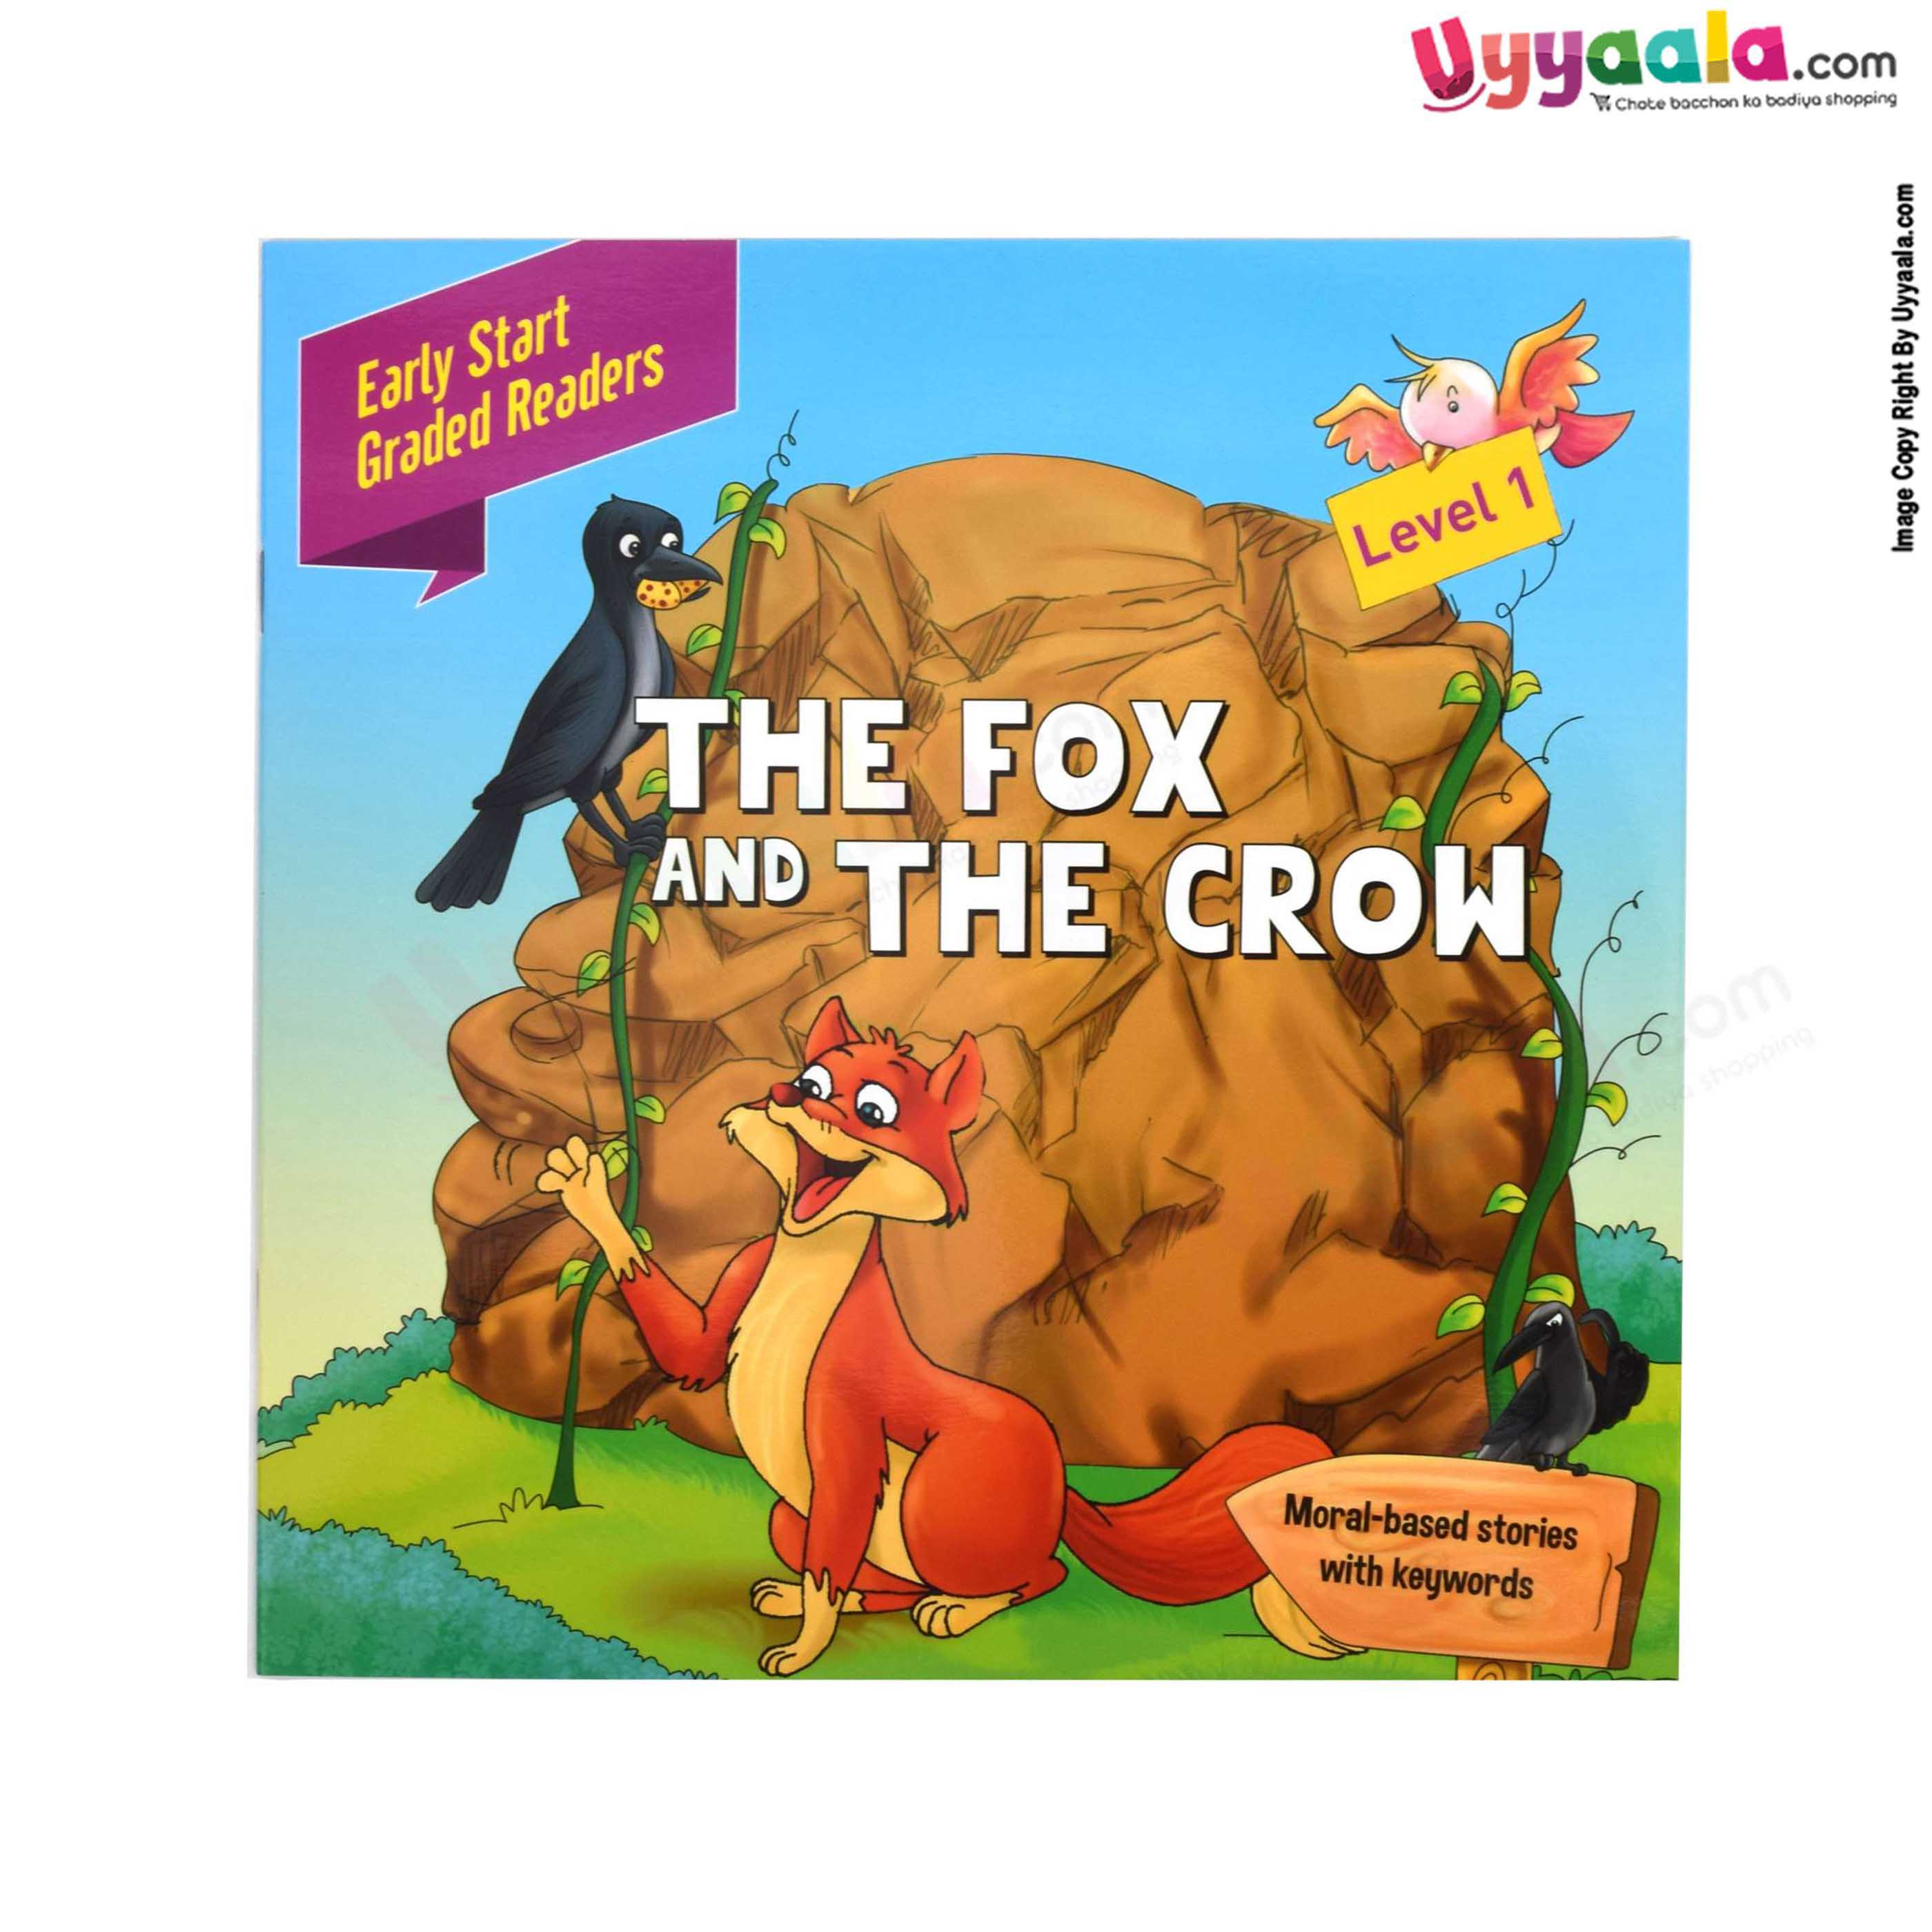 Early start graded readers -moral based stories, the fox and the crow, level - 1 (2 - 5 years)